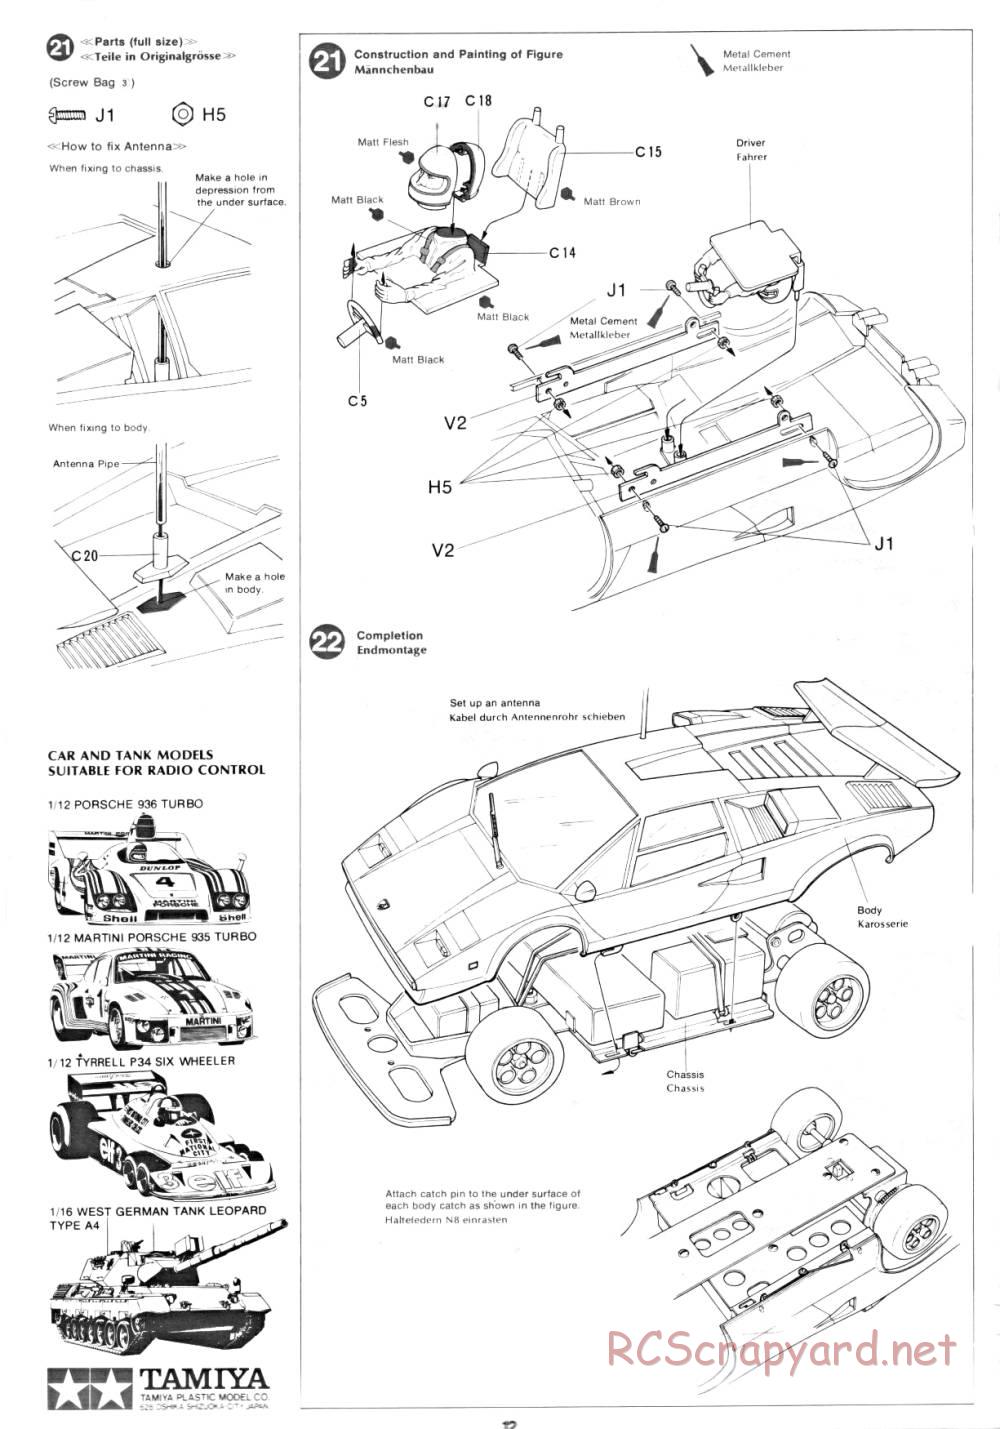 Tamiya - Lmbrghni Countach LP500S - 58005 - Manual - Page 12